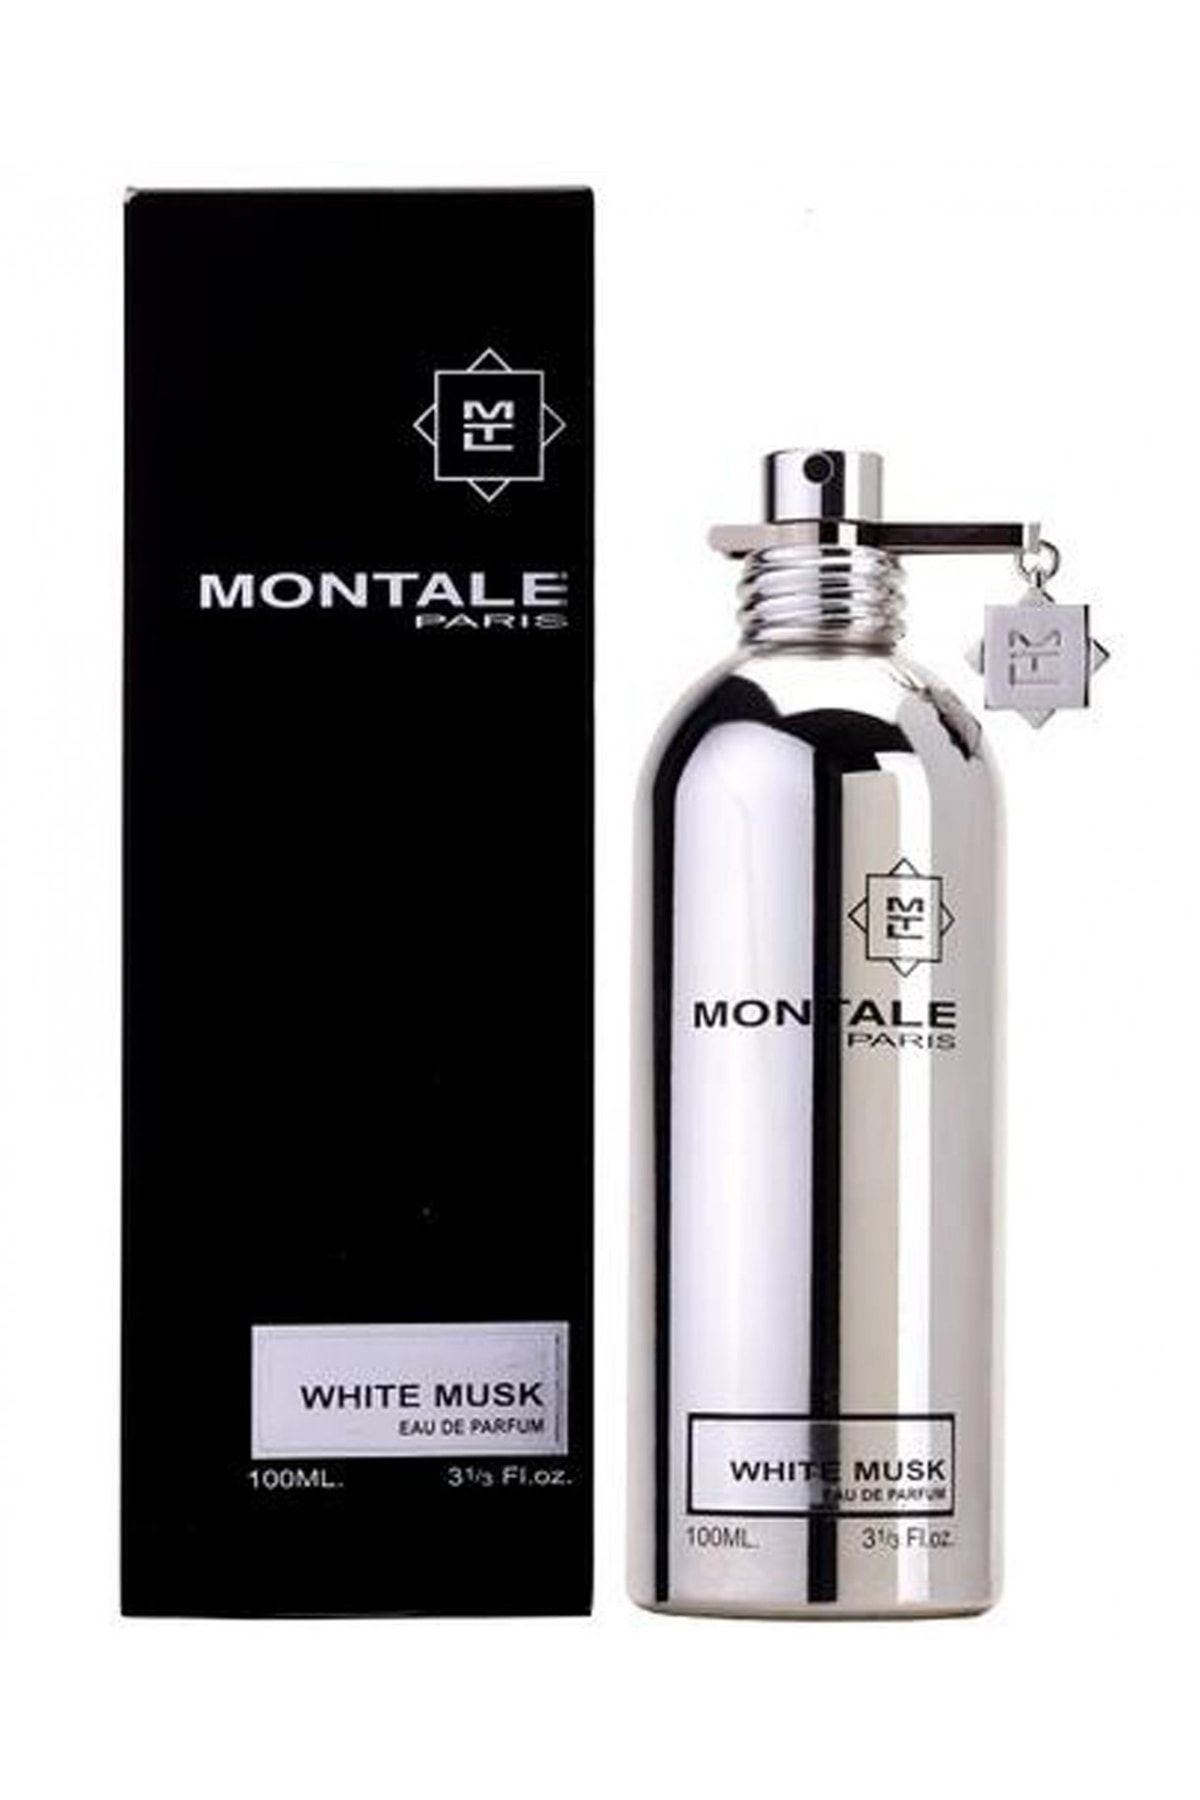 Montale ноты. Духи Montale Wood Spices. Montale Musk to Musk EDP 100 ml. Духи Монталь солнце капри. Montale White Musk.